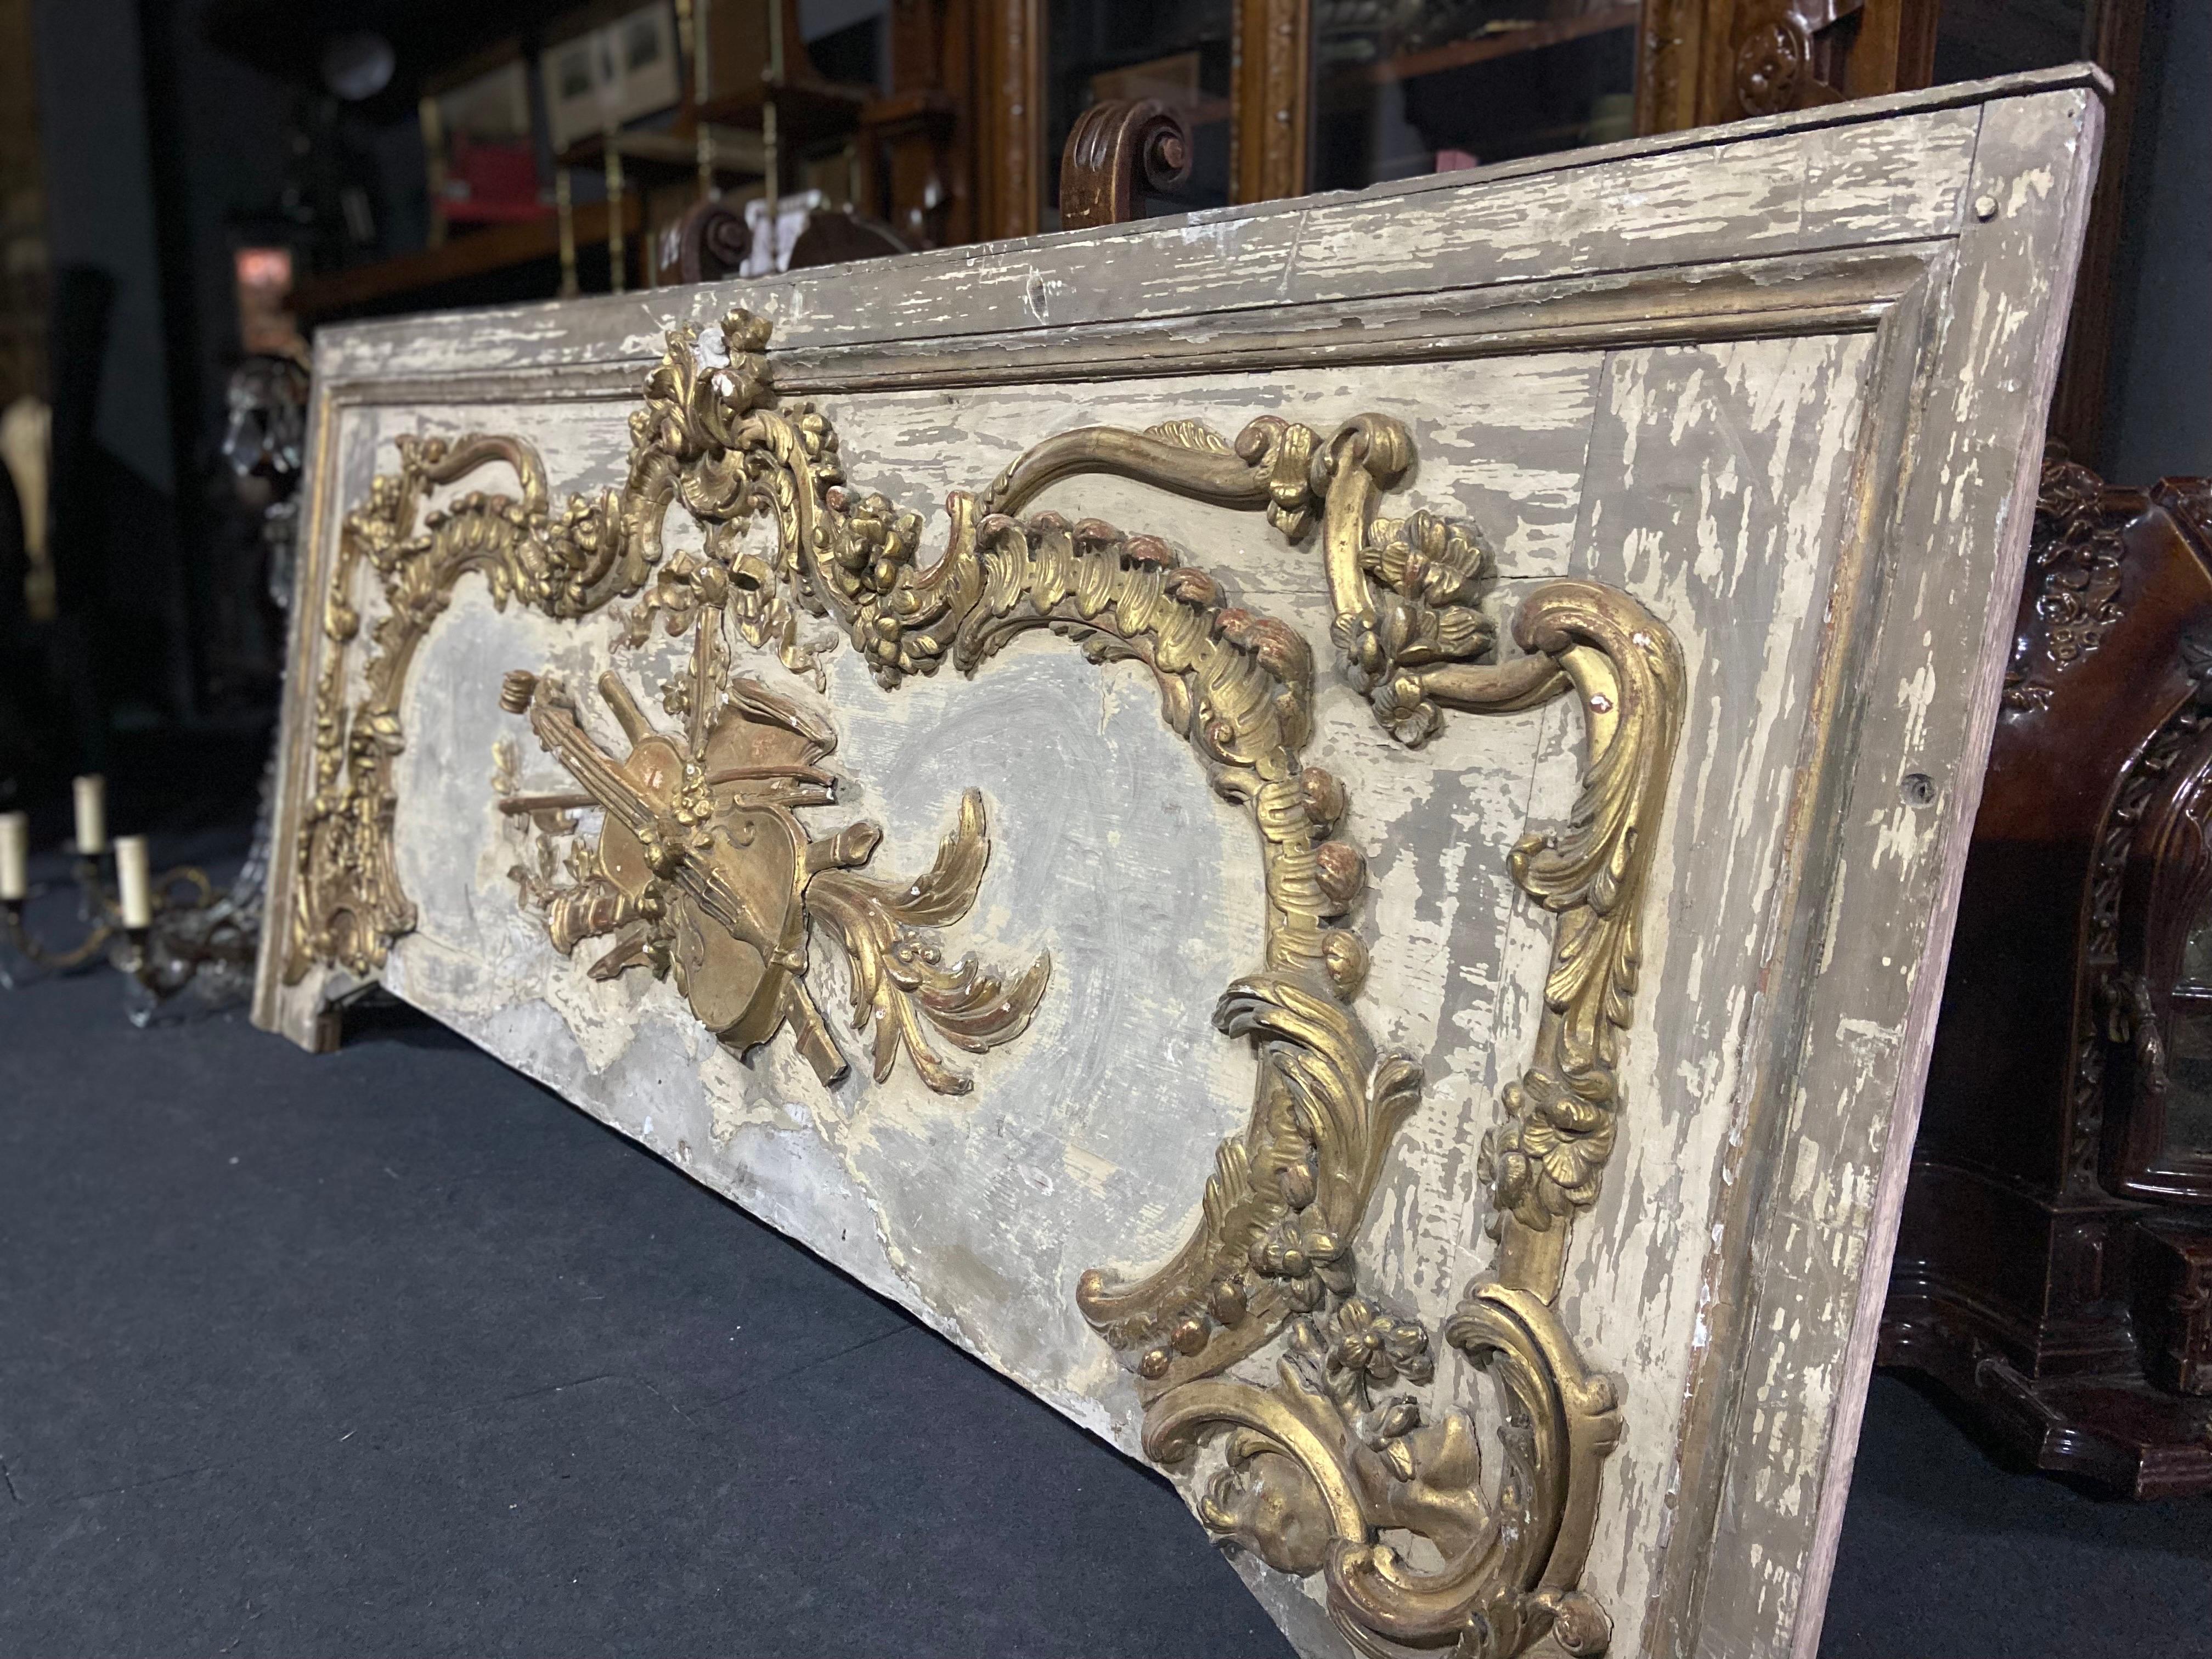 Exceptional large massive hand carved and hand painted decorative element which was placed over a grand fireplace more than 150 years ago. There were no restorations so far and it is absolutely authentic with fading in the colour and some cracks of